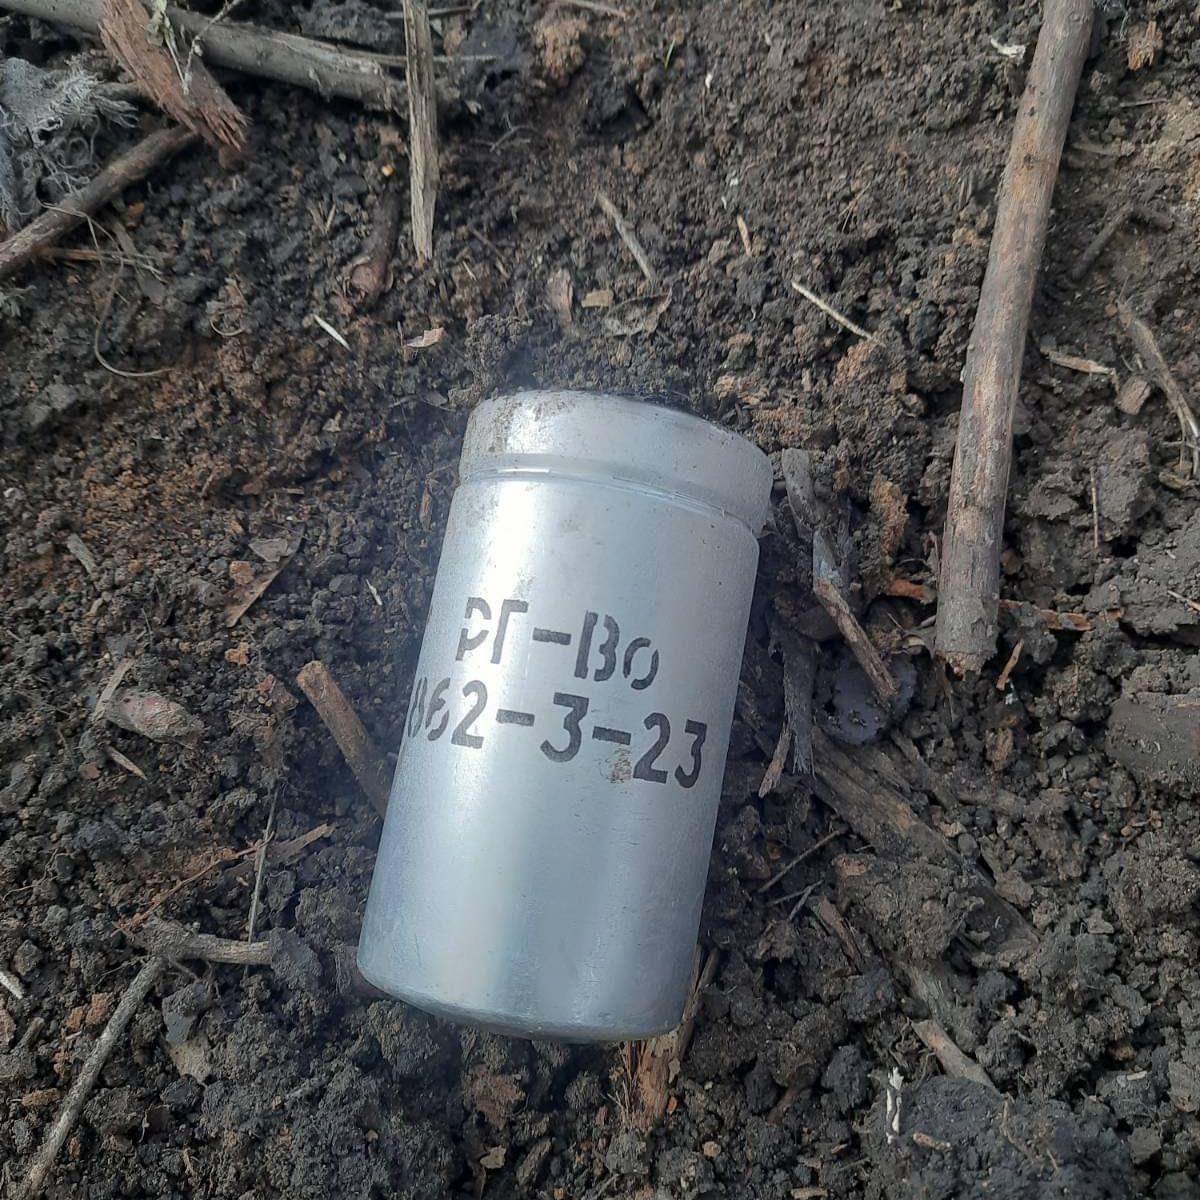 TGA0778 – RG-Vo Gas Grenades with Chloroacetophenone Agent, Ukraine